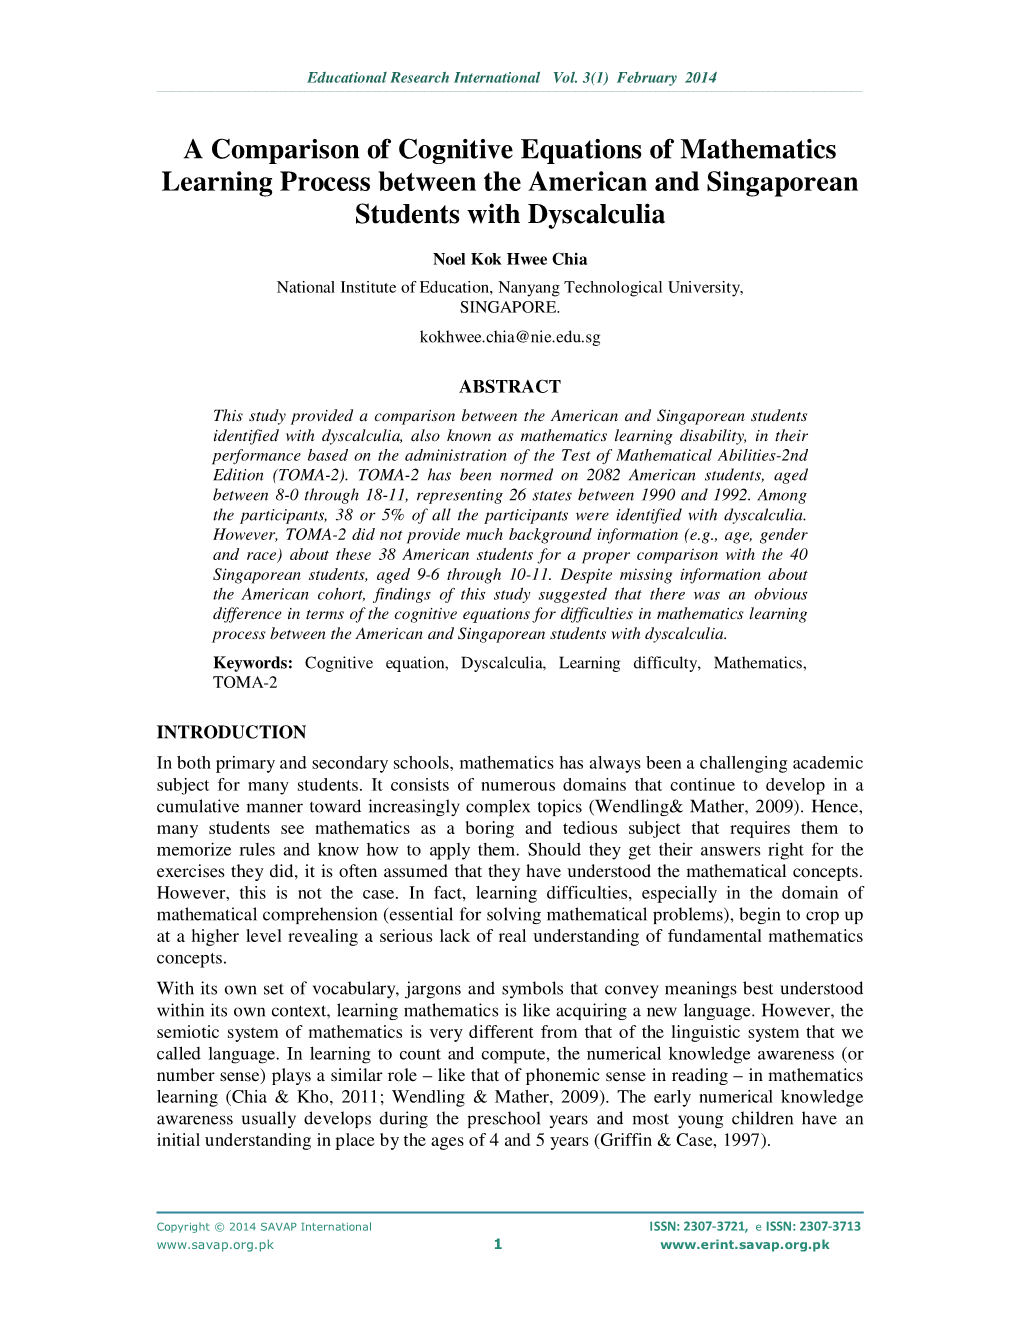 A Comparison of Cognitive Equations of Mathematics Learning Process Between the American and Singaporean Students with Dyscalculia